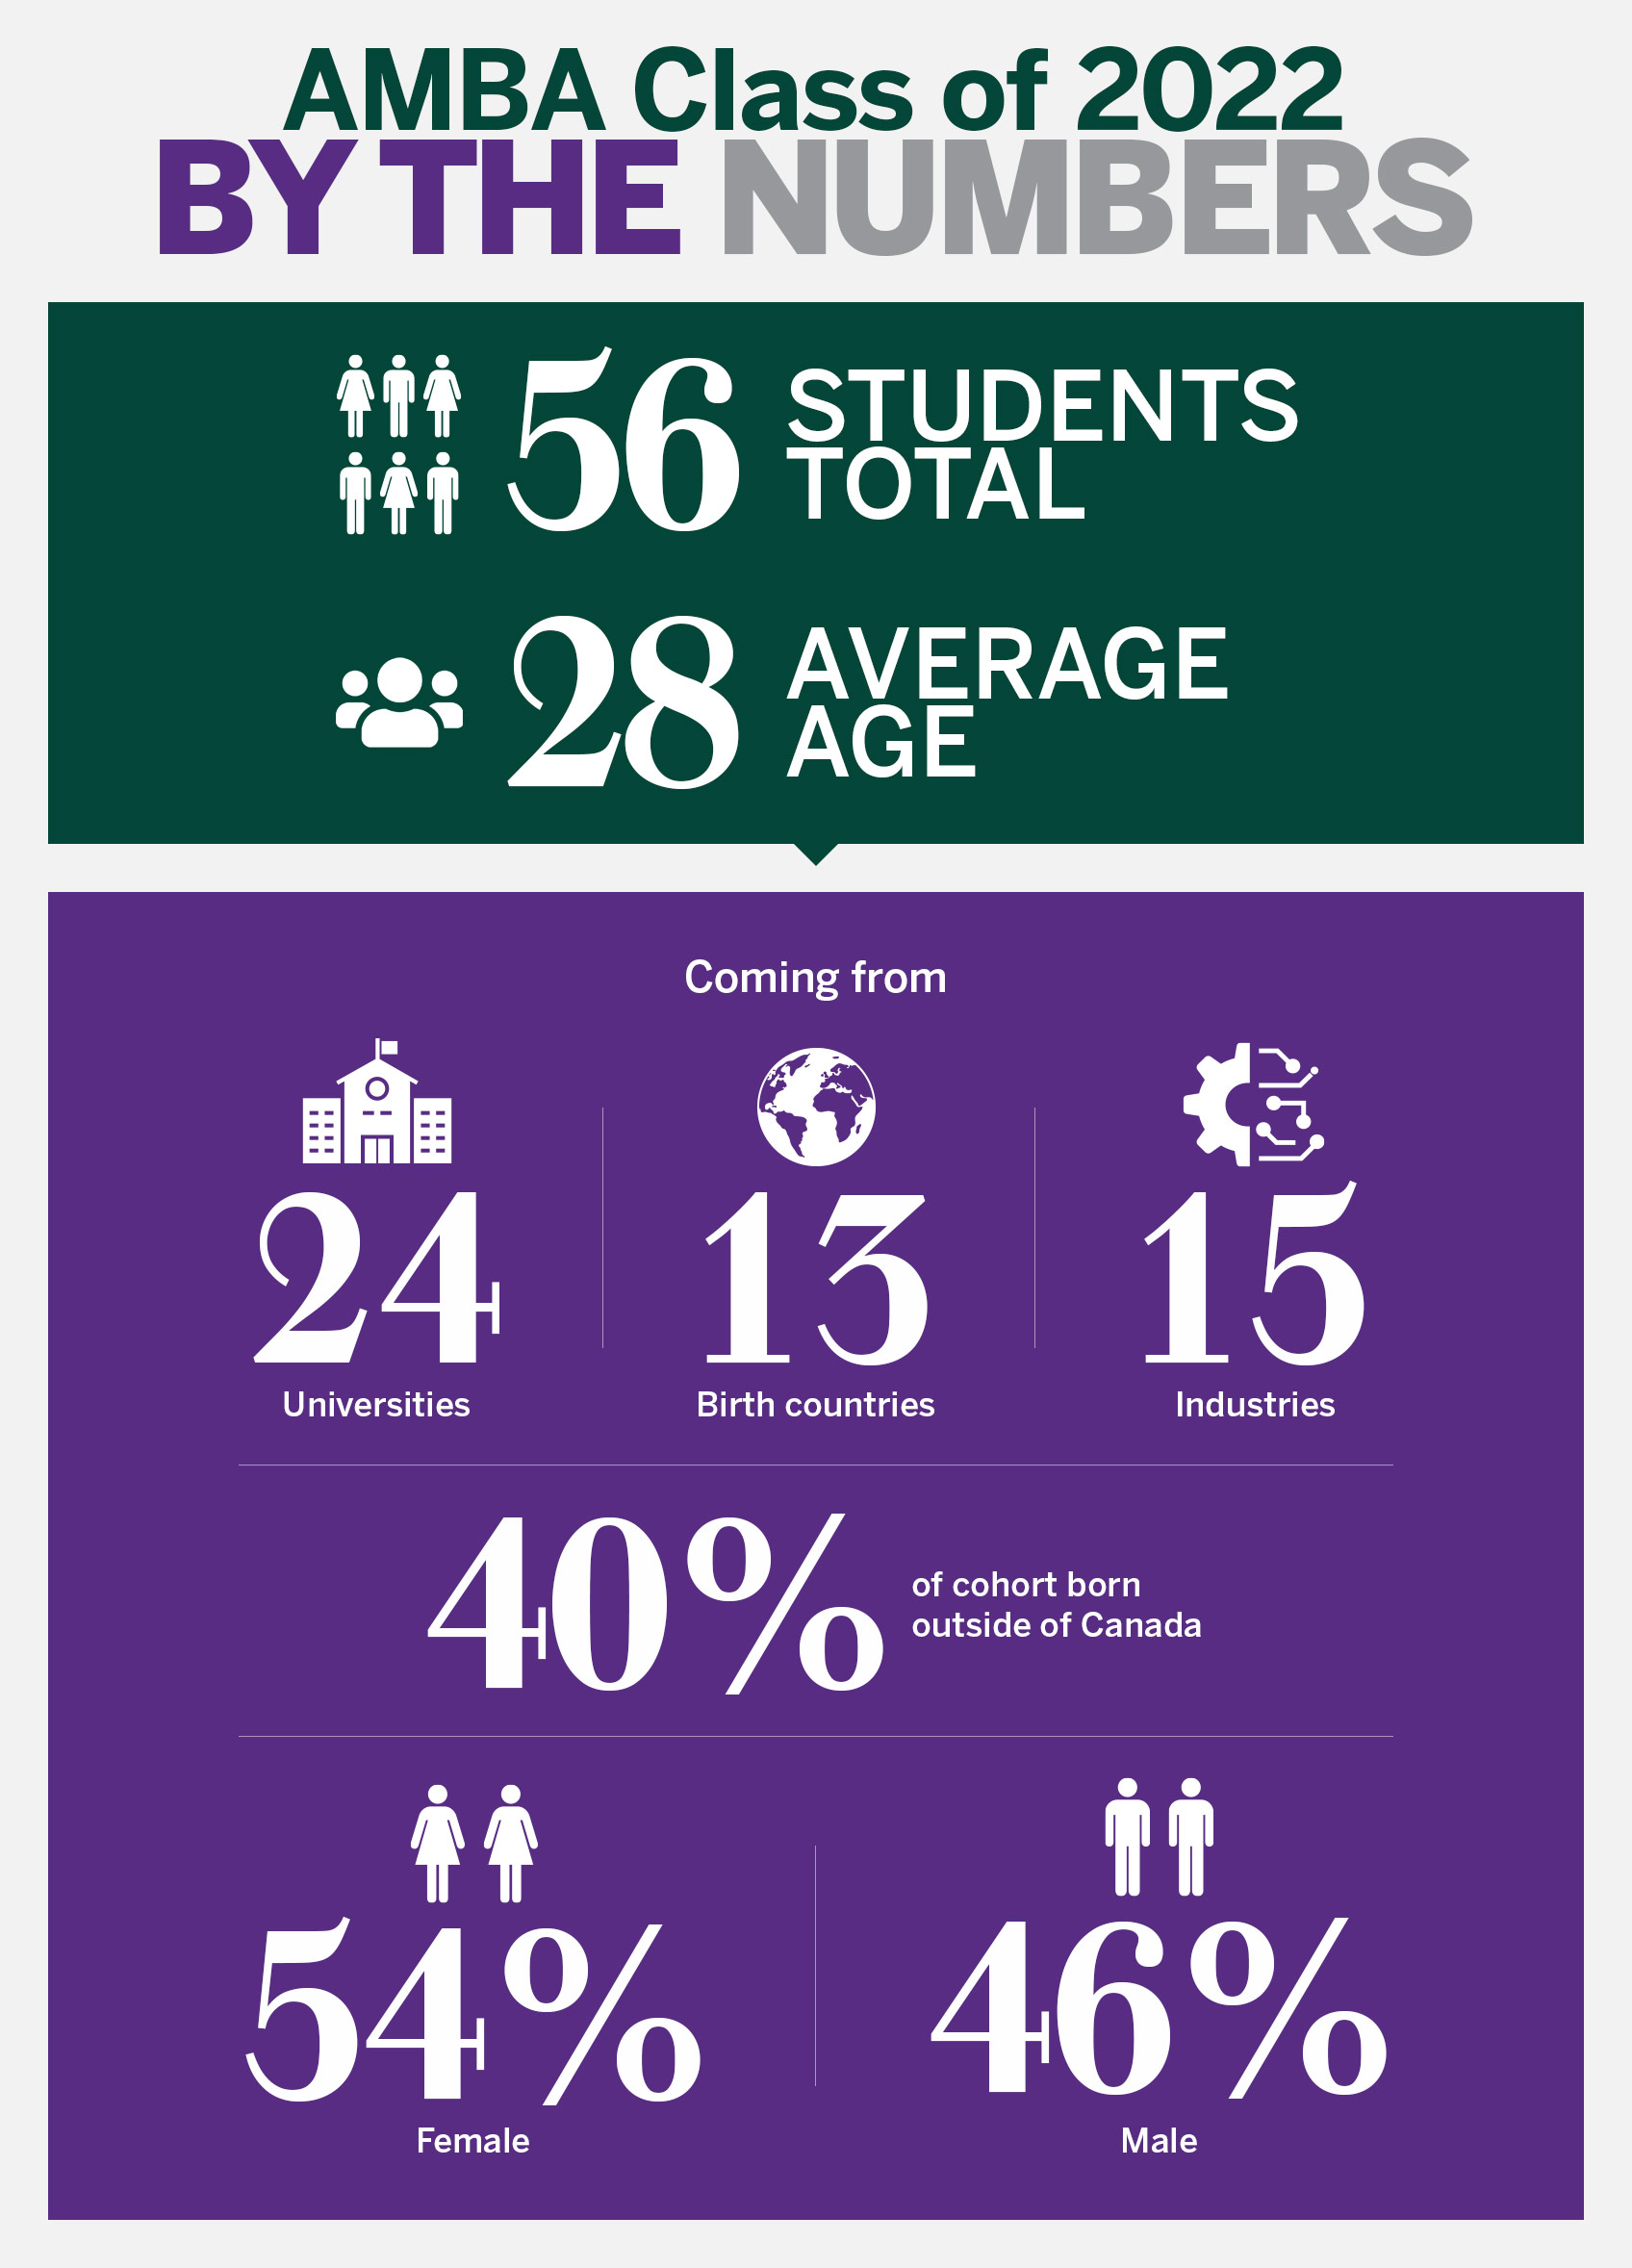 AMBA Class of 2022 by the numbers image